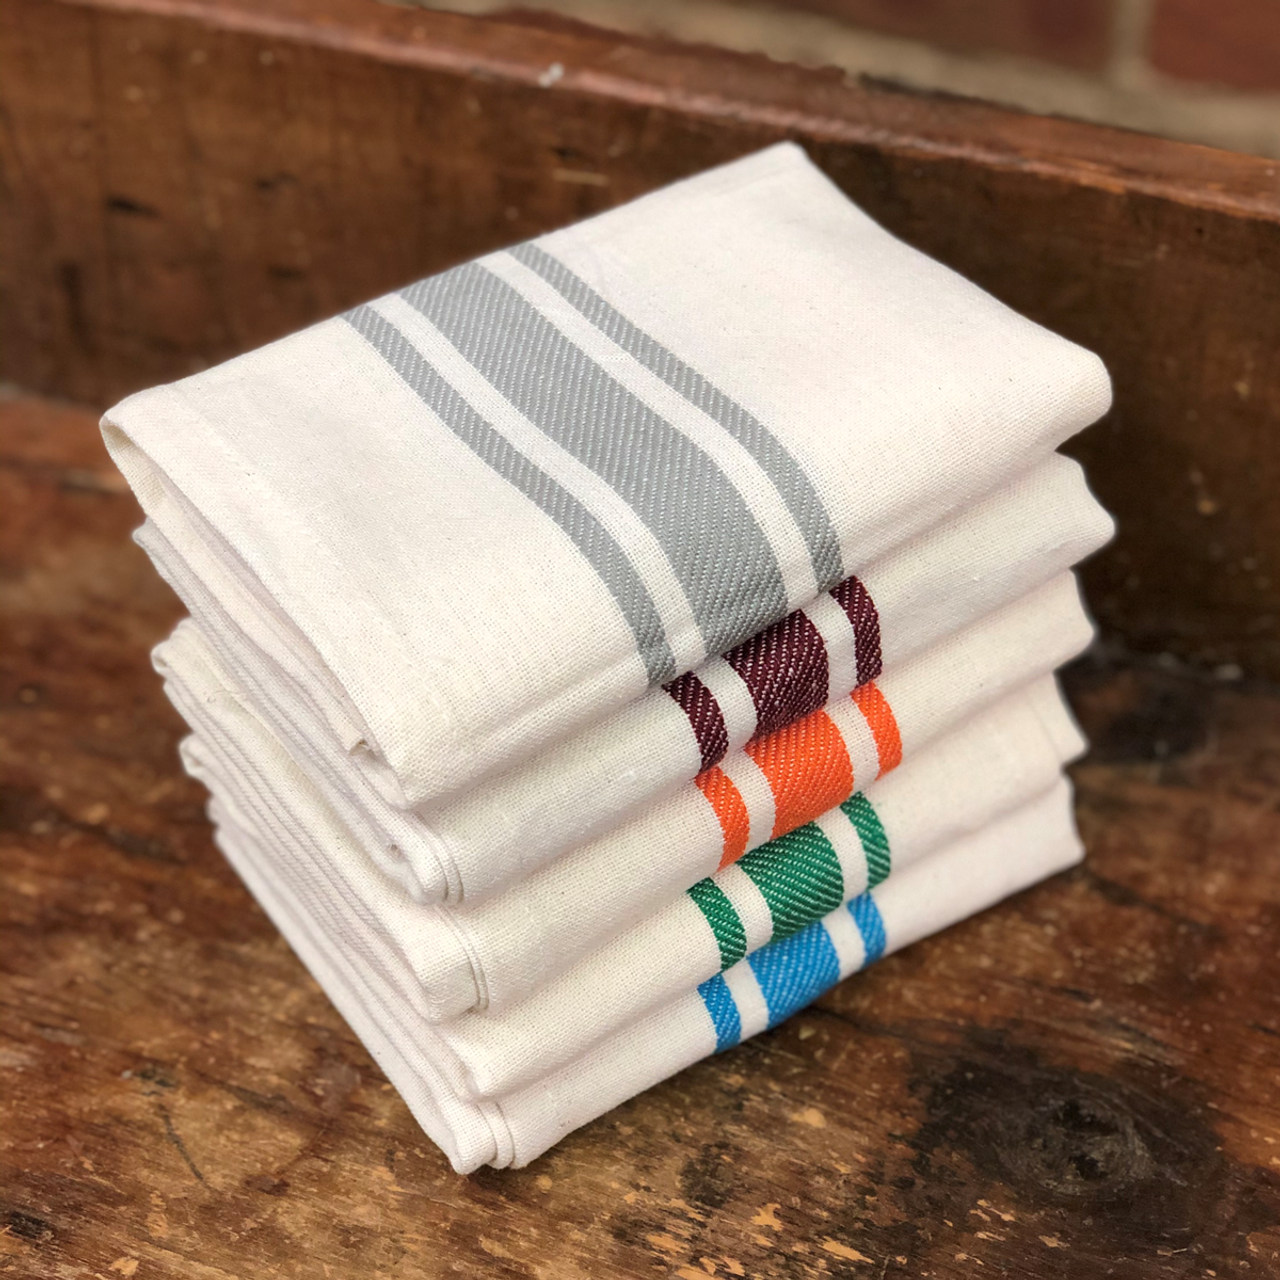 https://cdn11.bigcommerce.com/s-qlw1zct7w/images/stencil/1280x1280/products/2589/11042/Vintage_Bold_Twill_Stripe_Tea_Towels_Sample_Pack__24946.1570887889.png?c=2?imbypass=on